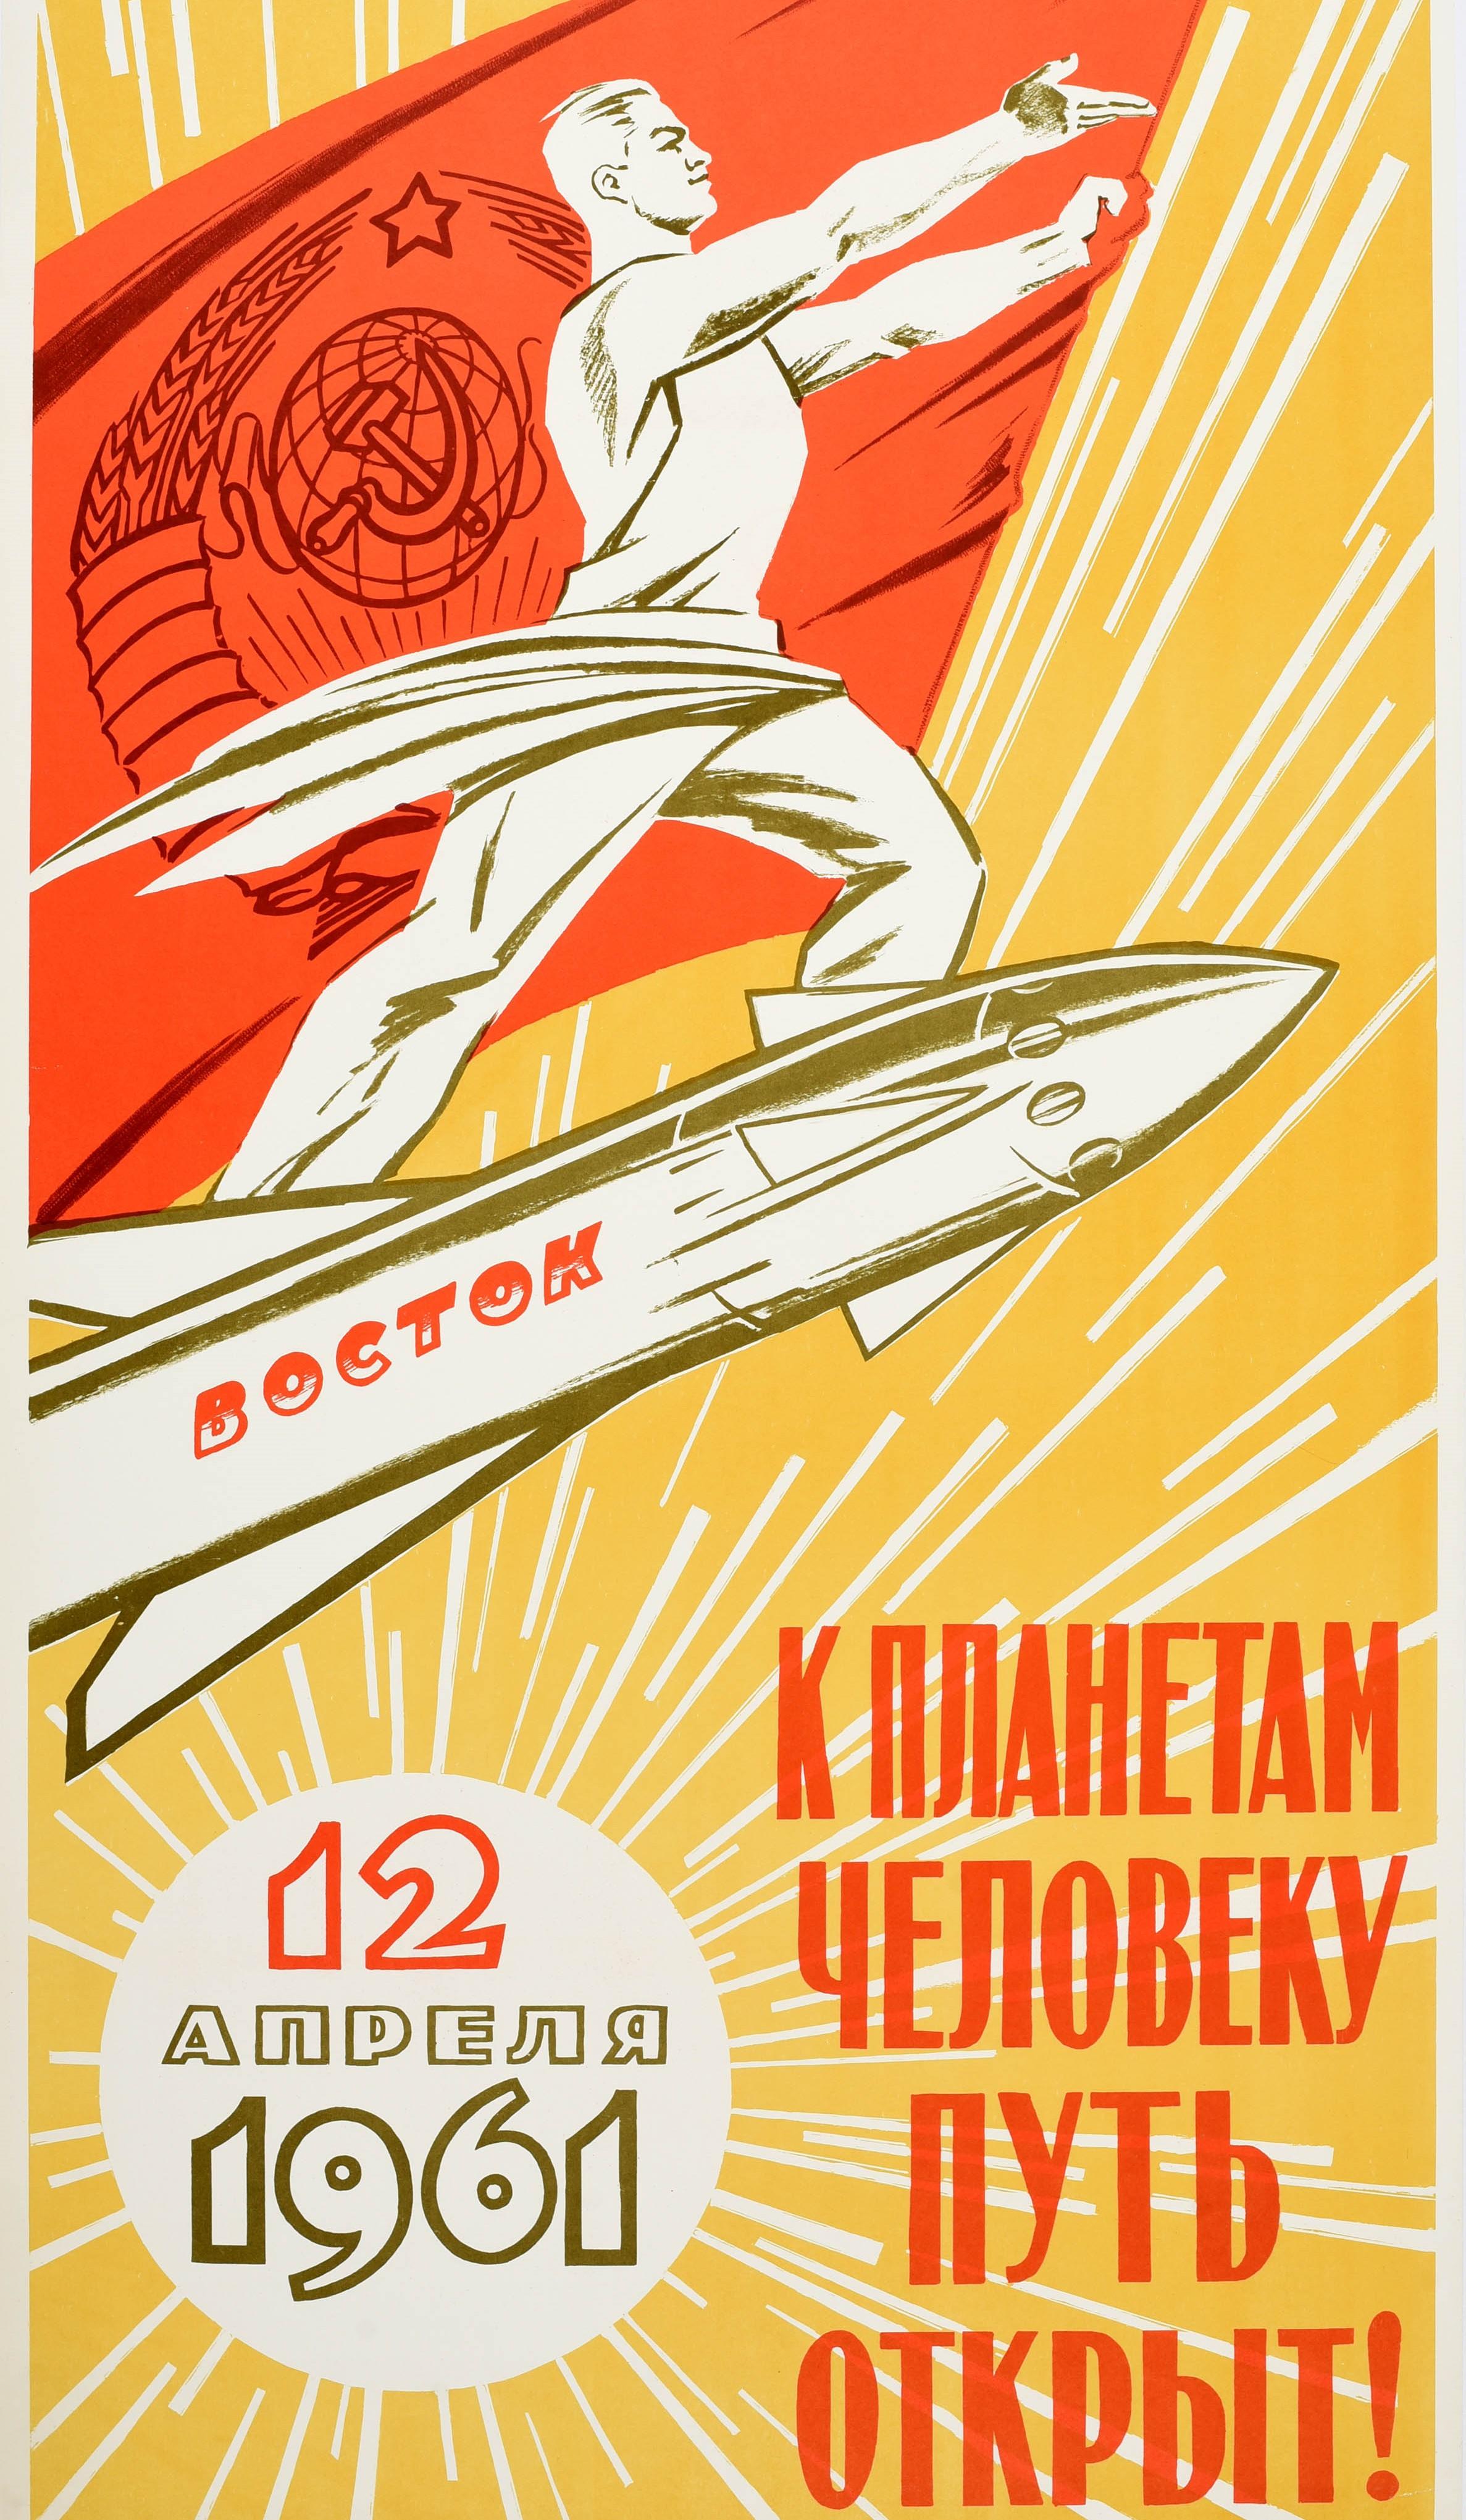 Original vintage Soviet space race propaganda poster - The Way to the Planets is Open to Mankind! К Планетам Человеку Путь Открыт! - issued in celebration of the first man in space on 12 April 1961, the pilot and cosmonaut Yuri Gagarin (Yuri